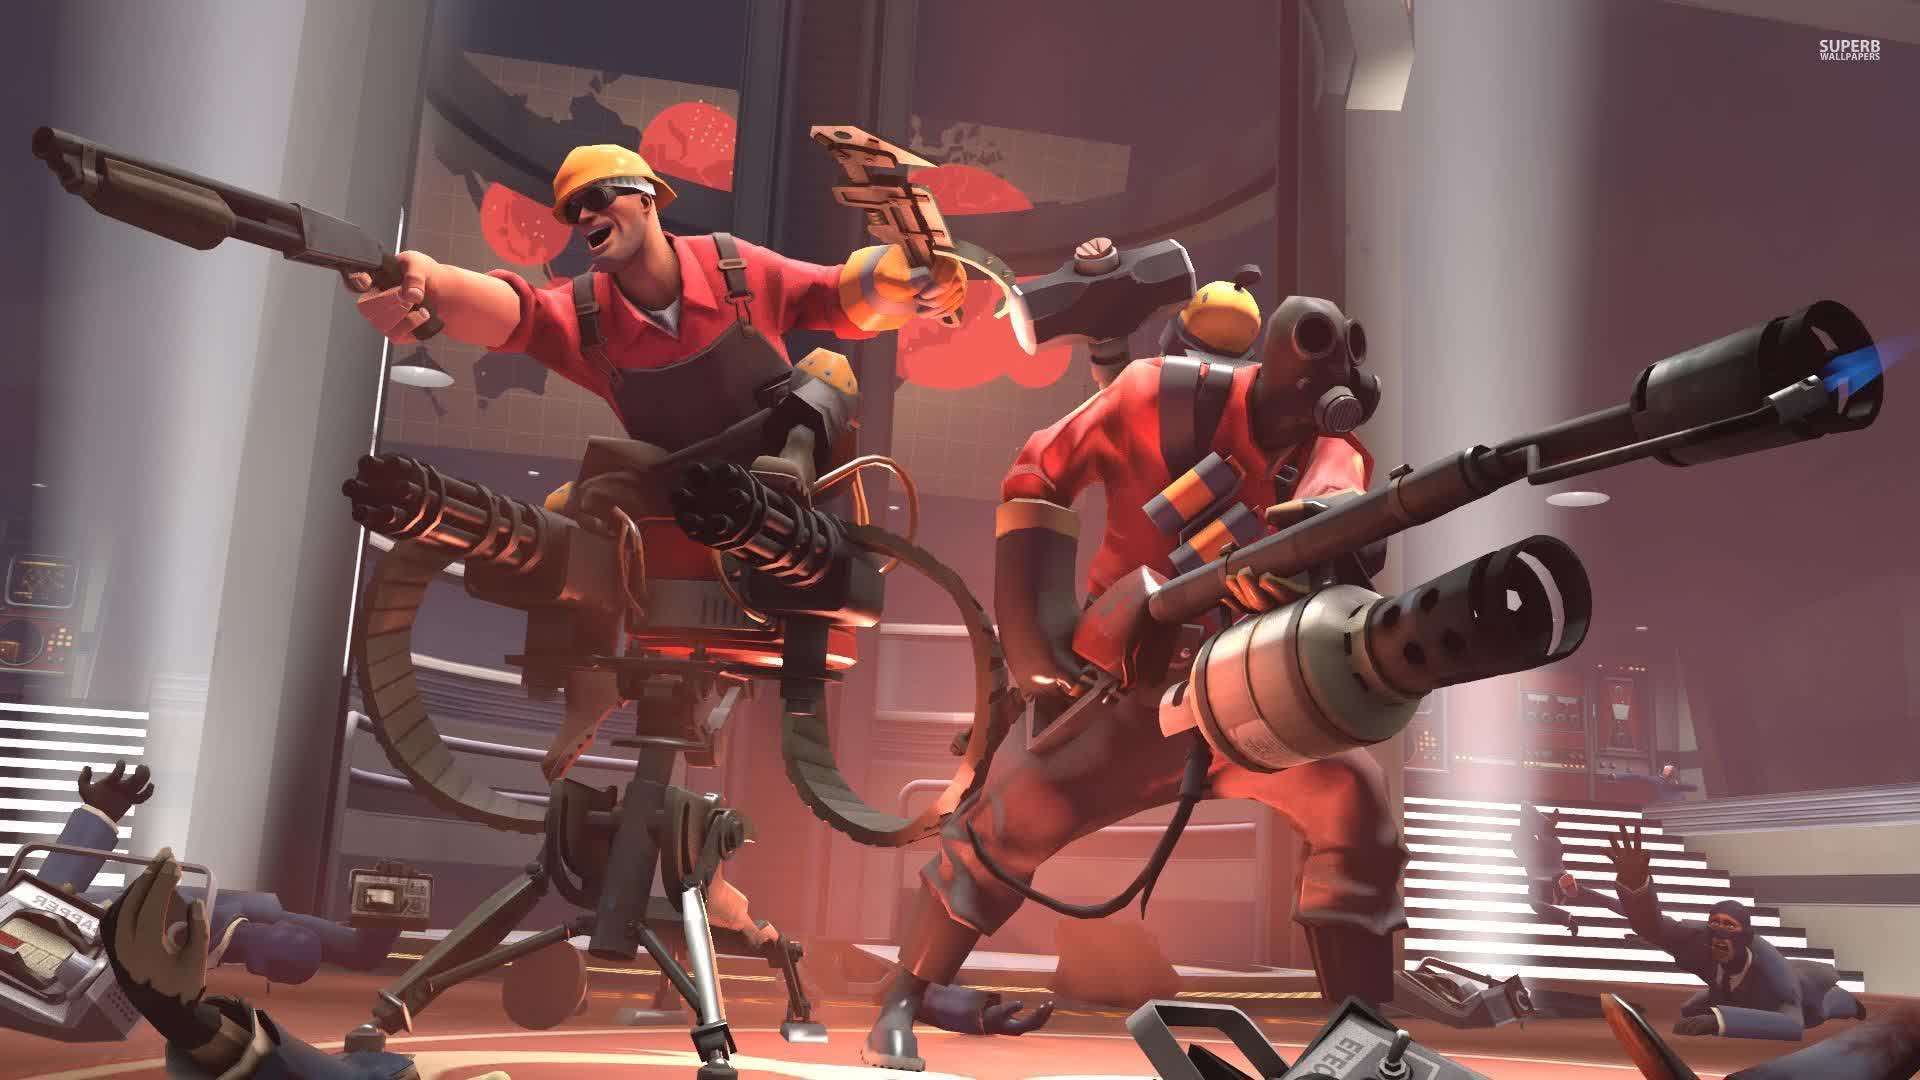 Valve releases Team Fortress 2 for free, for good